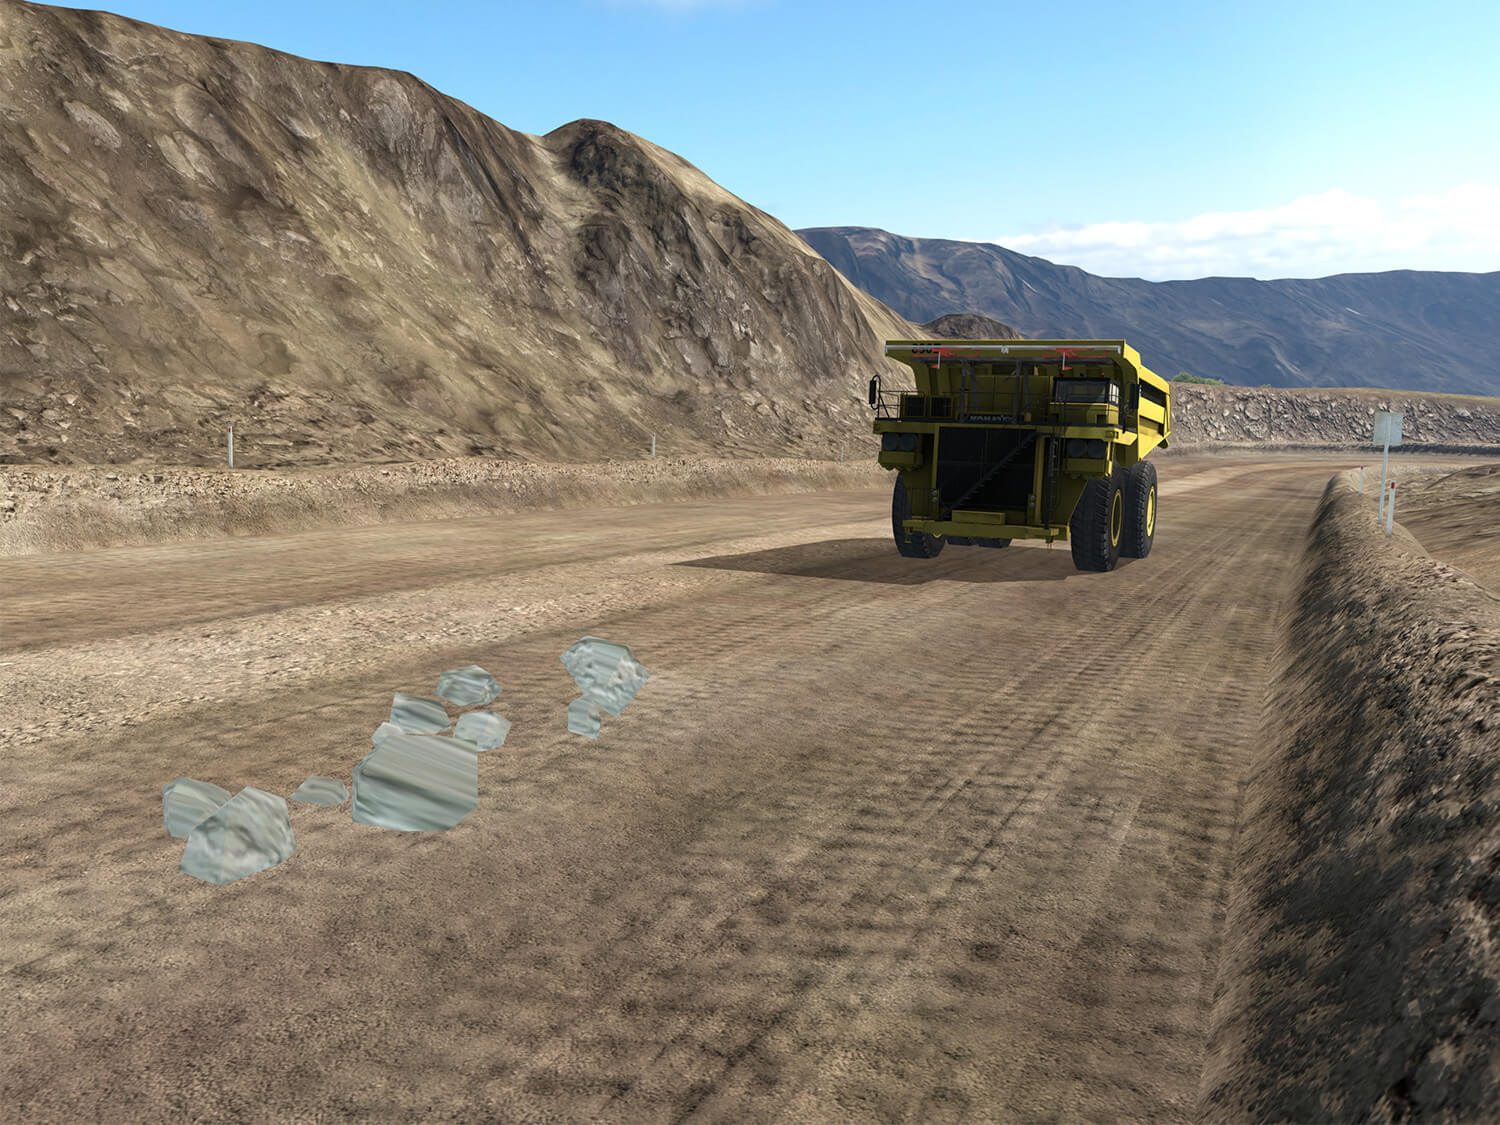 Komatsu 830E-5T Haul Truck (Trolley Assist, with Multifunctional Operator Display) - Training for Rocks Event